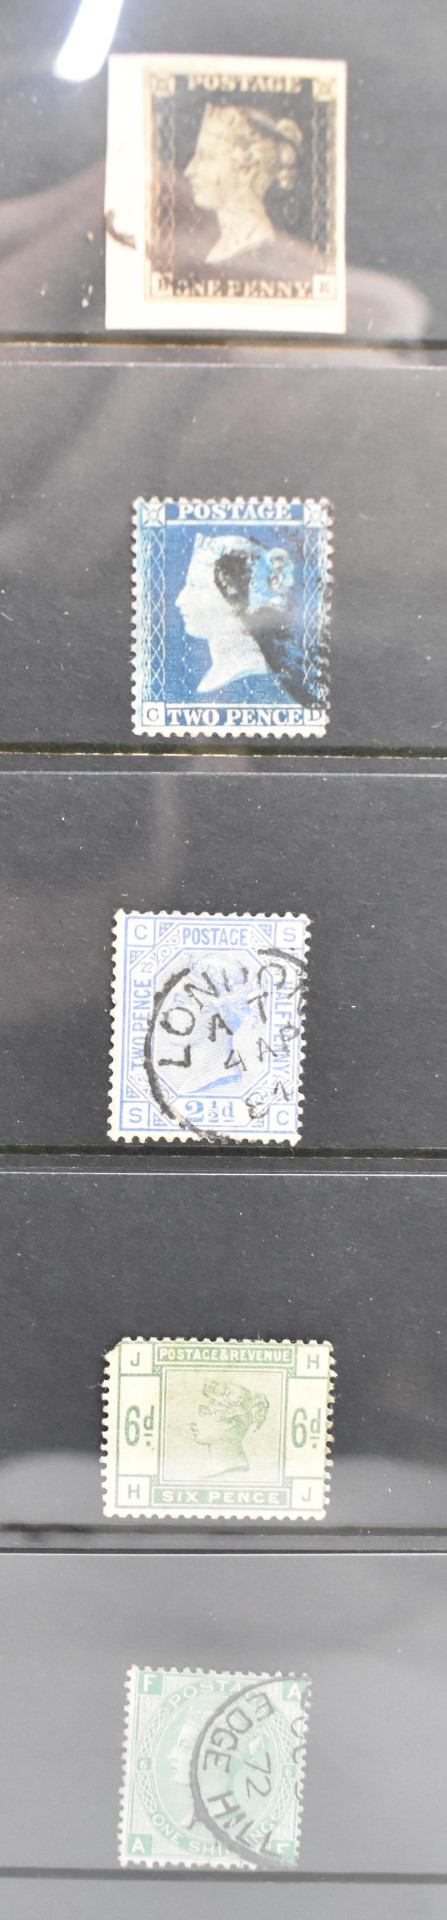 Mint and used GB stamp collection from 1840 1d black (on piece) to decimal modern Queen Elizabeth II - Image 18 of 31